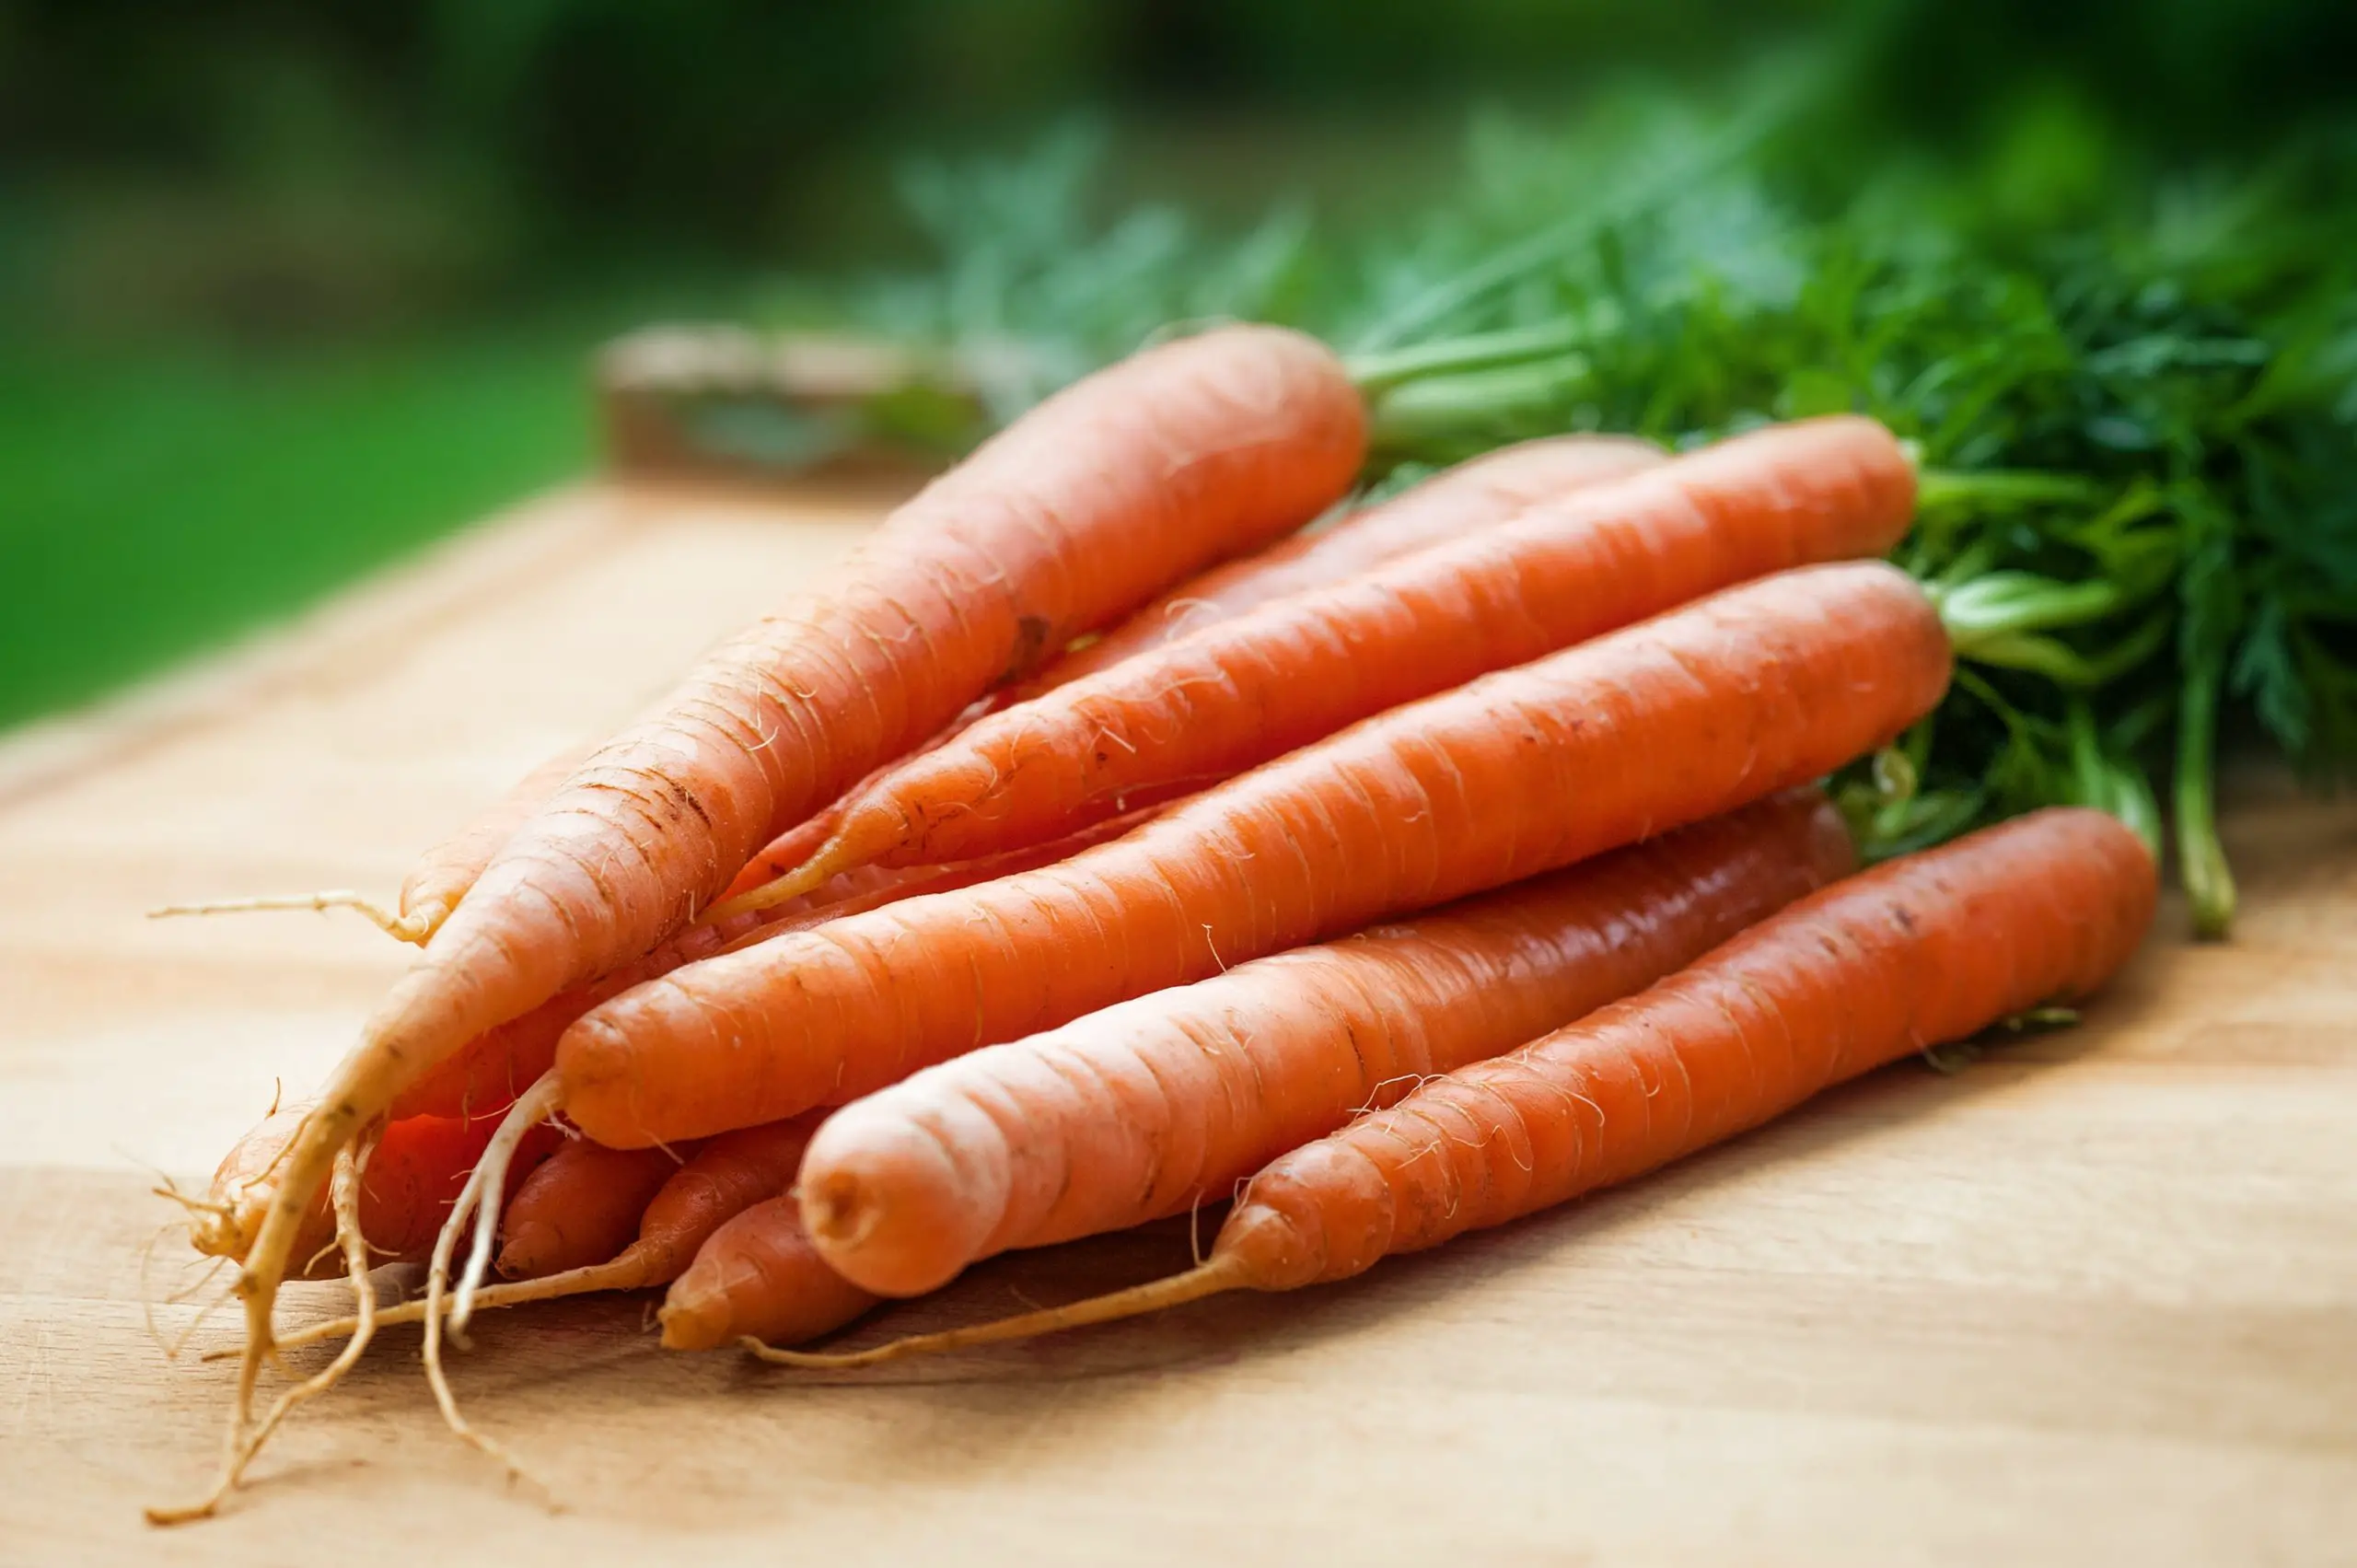 How to Freeze Carrots Without Blanching